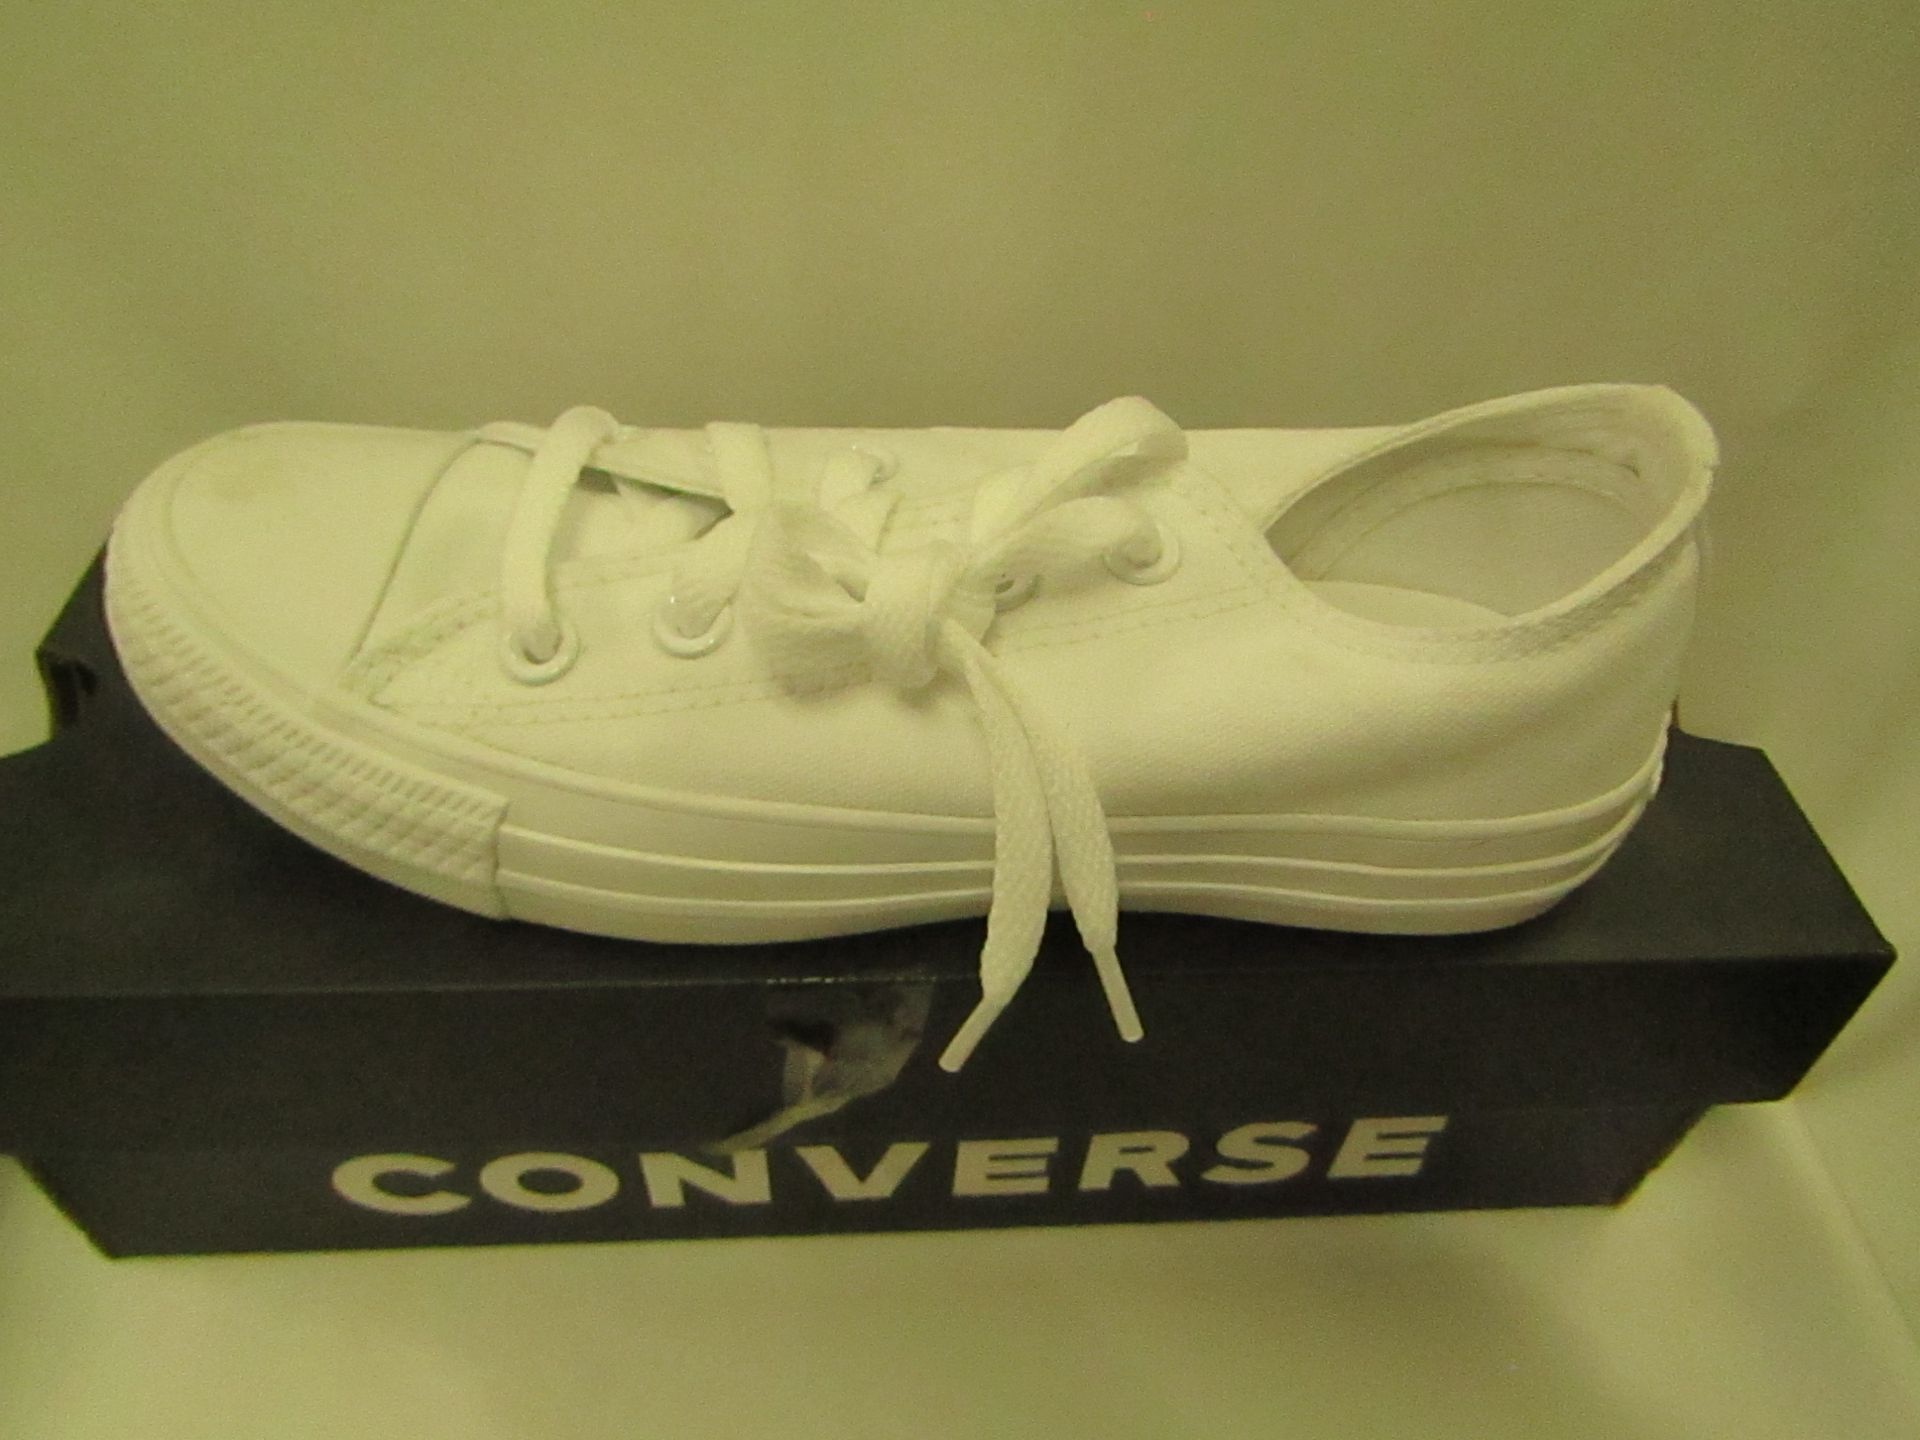 Converse All Star White Size 3.5 New & Boxed